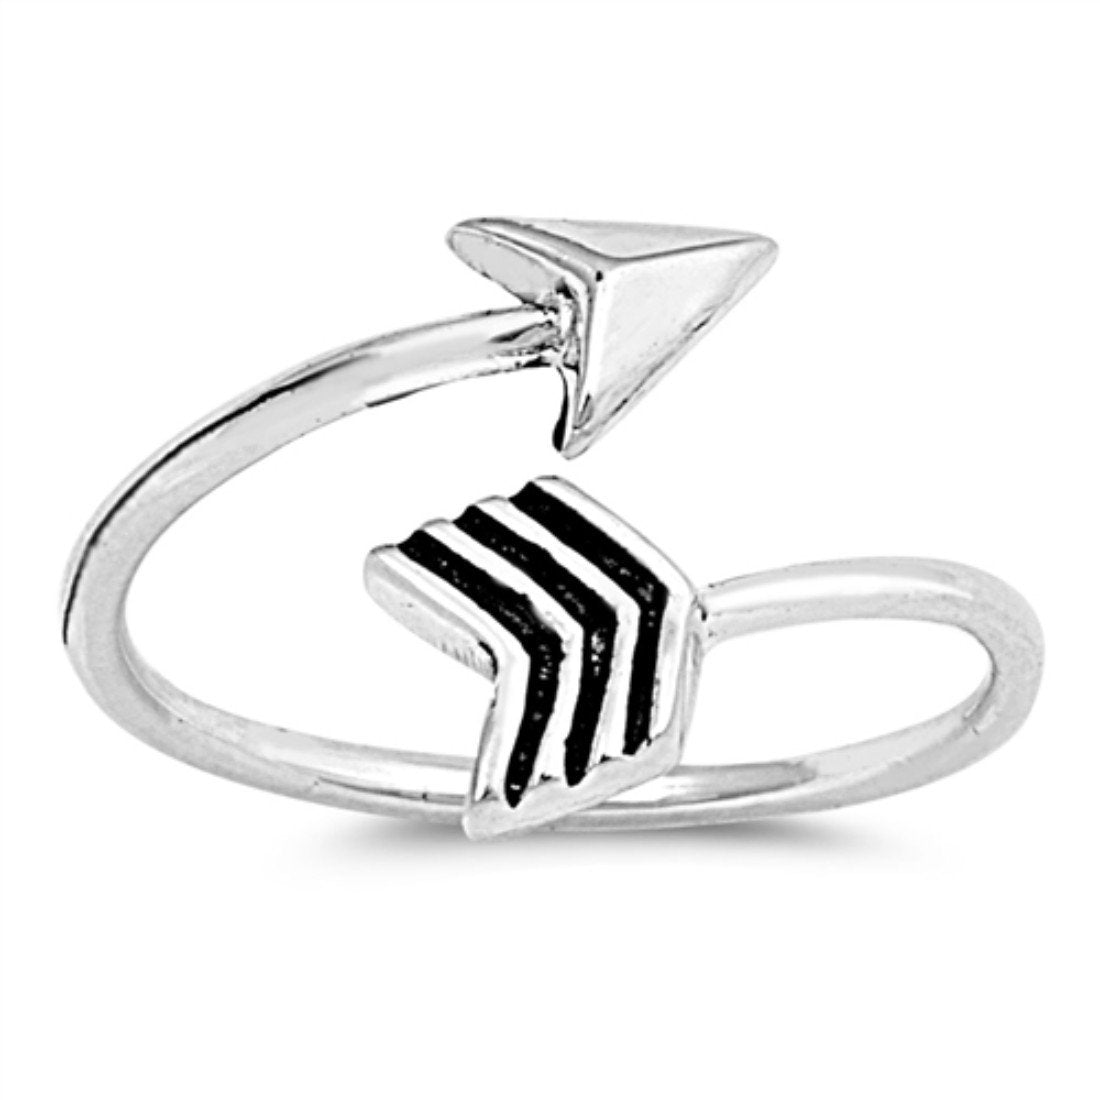 Arrow Silver Toe Ring Adjustable Band 925 Sterling Silver (9mm)